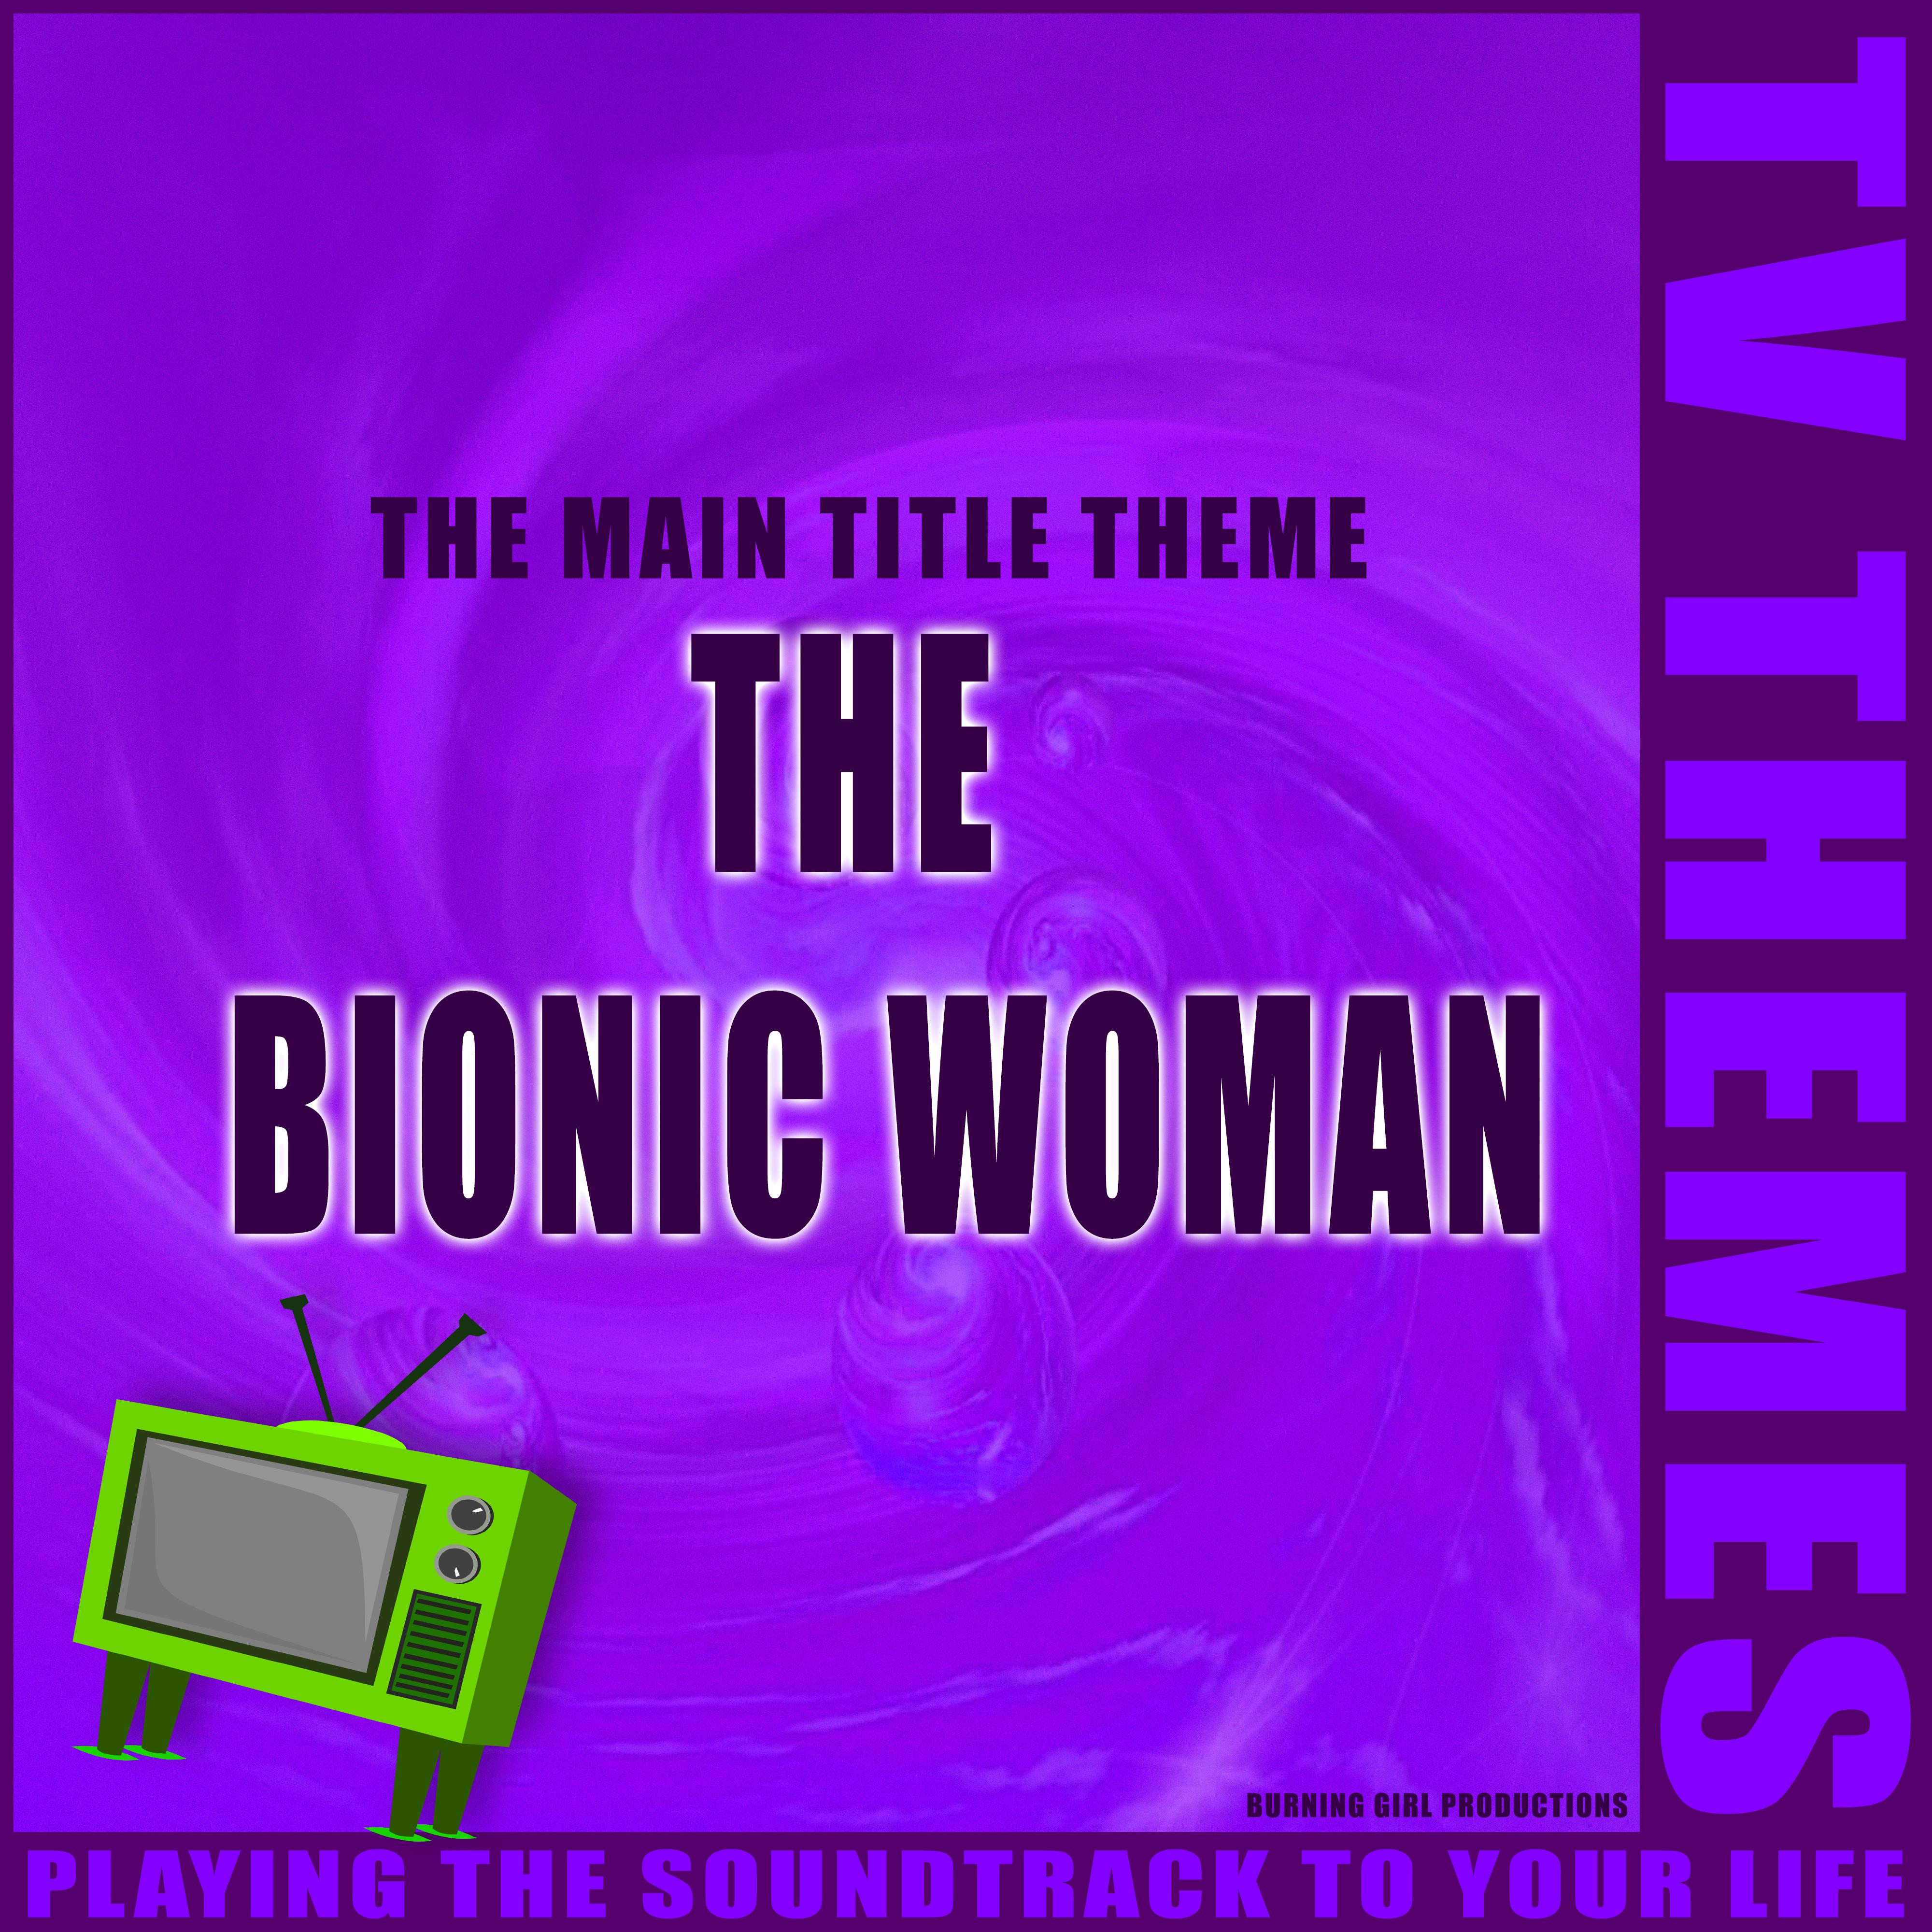 The Bionic Woman - The Main Title Theme